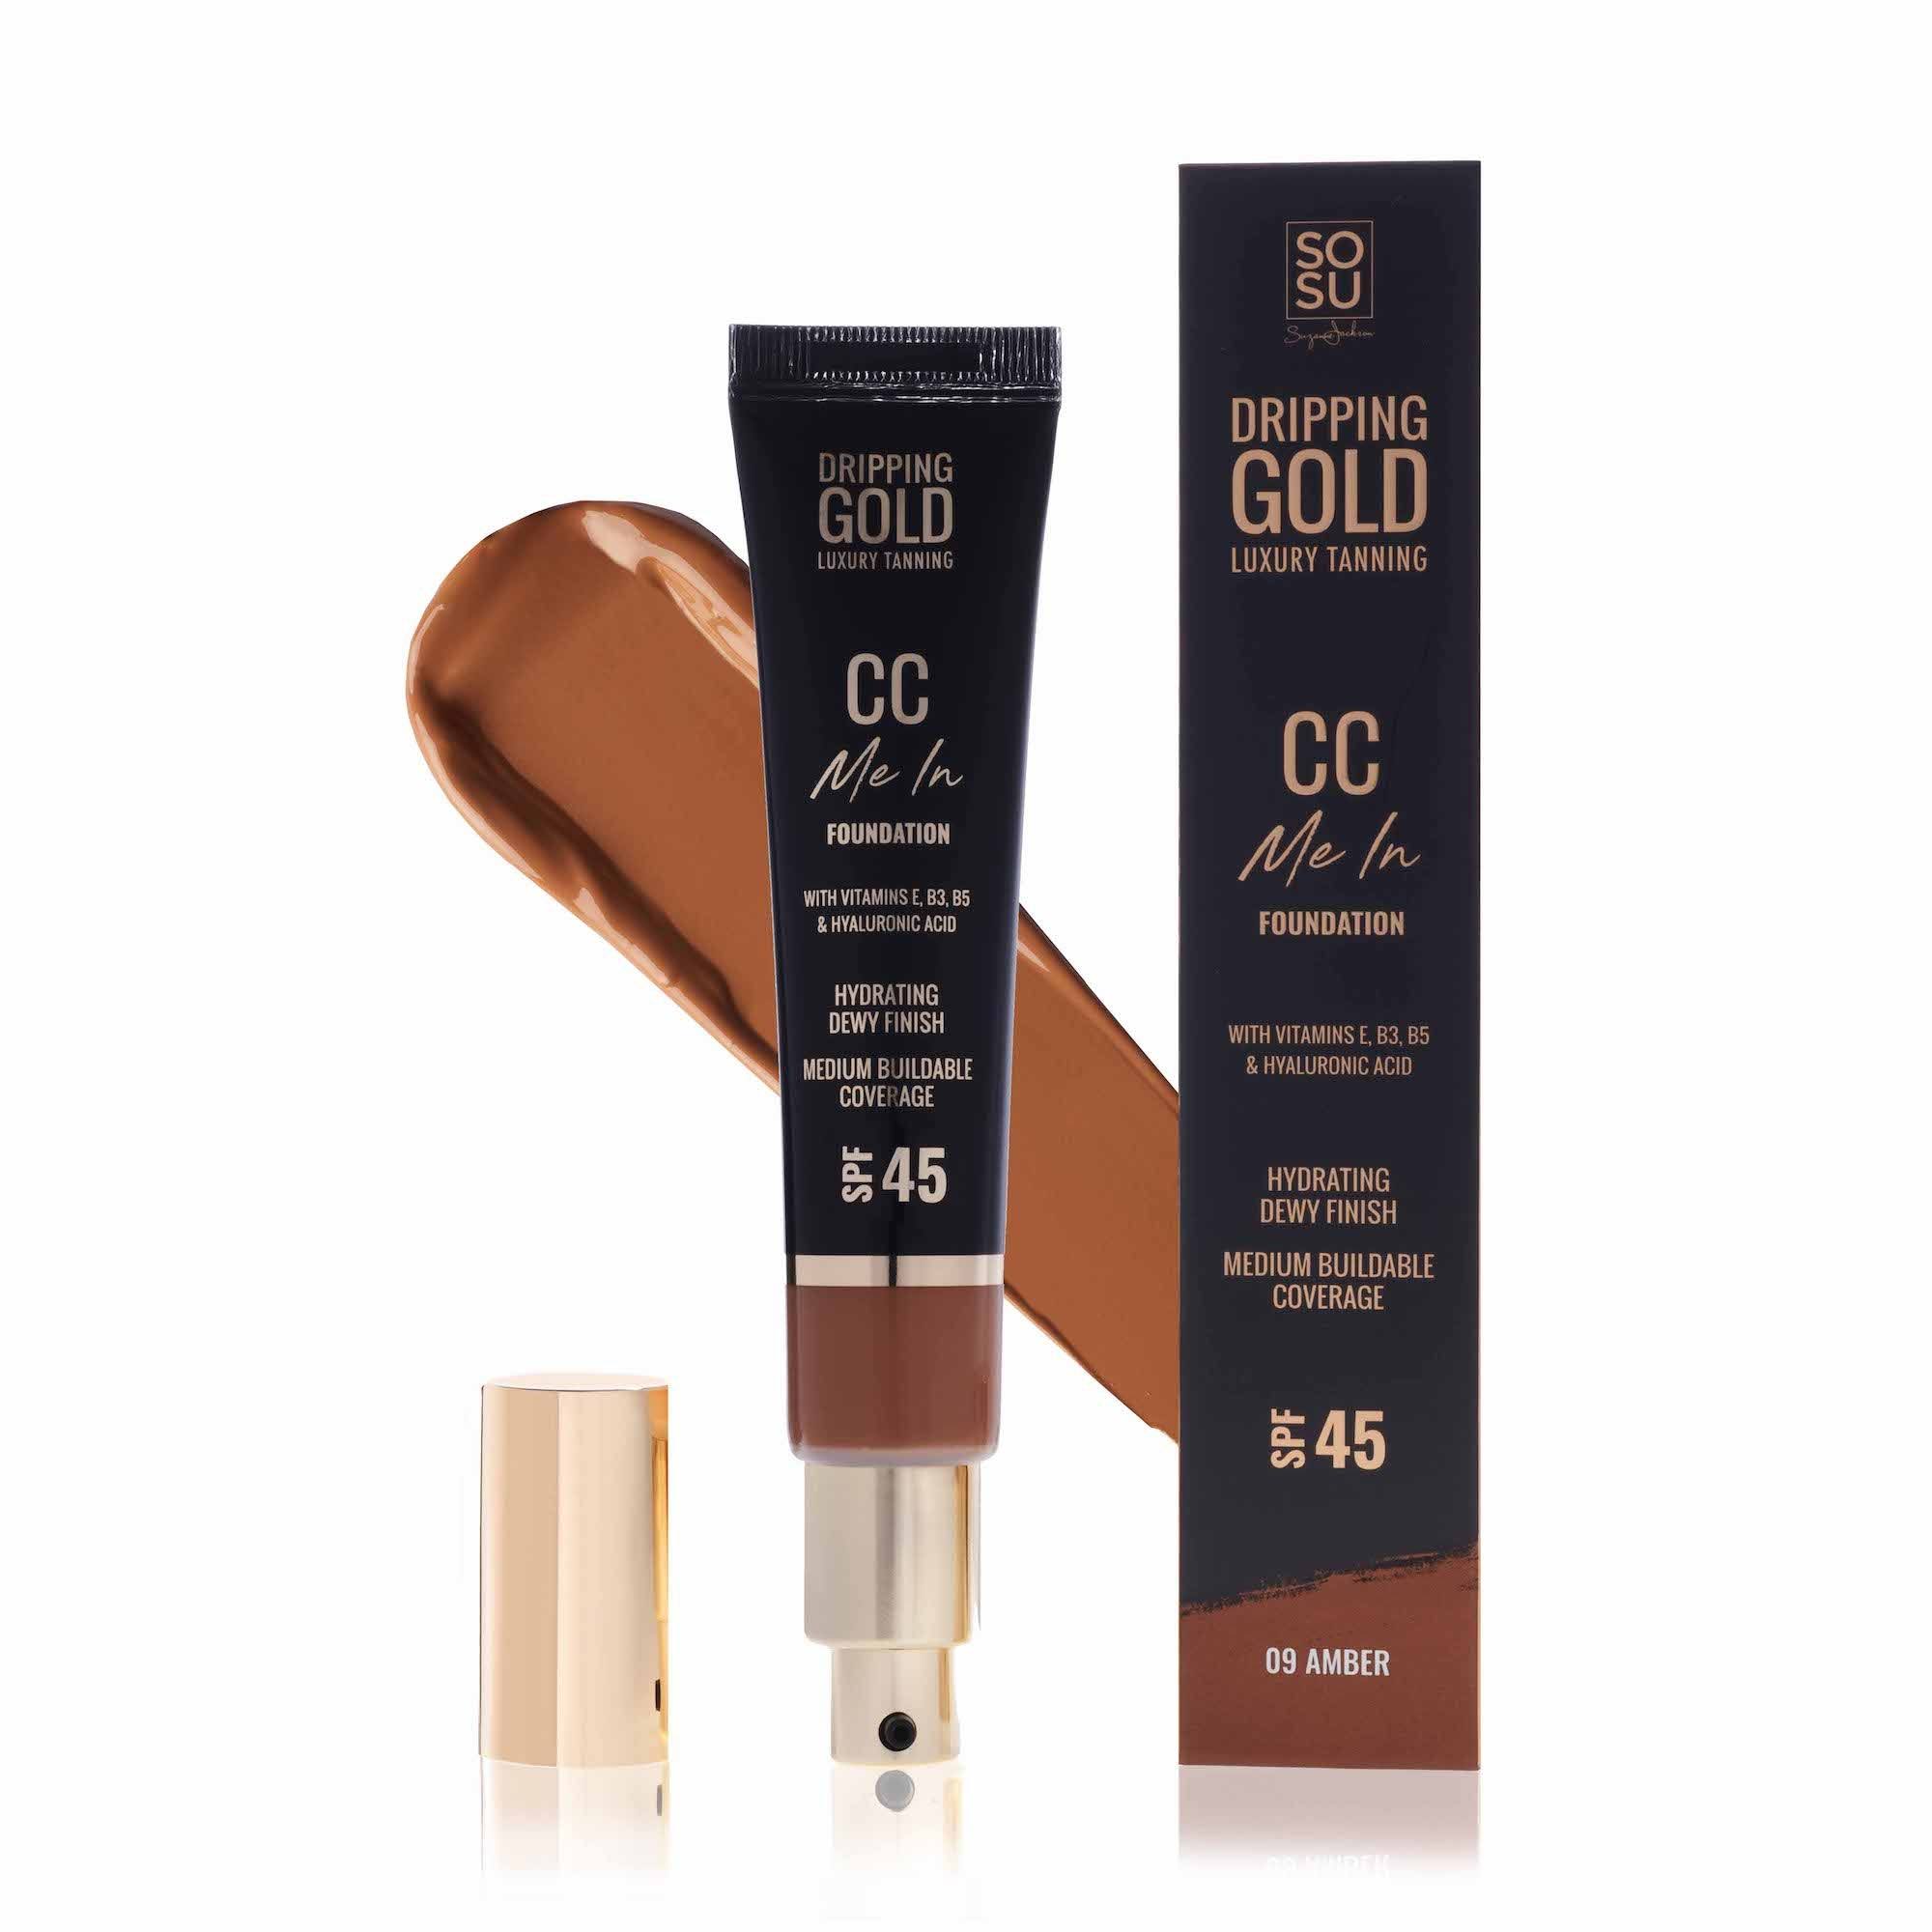 Dripping Gold CC Me in Foundation SPF4509 Amber